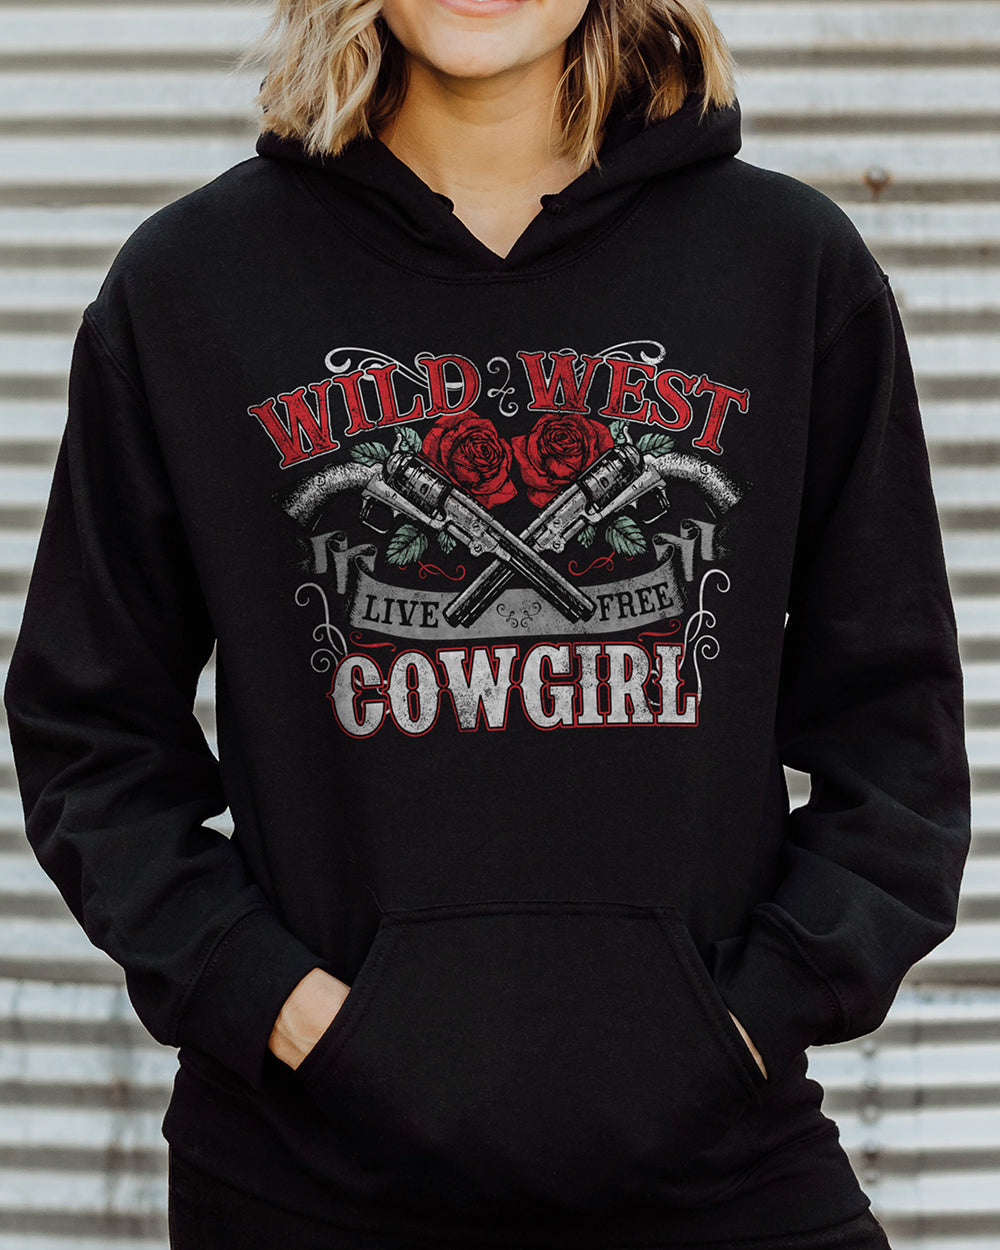 Long Live The Cowgirls Hoodie Retro Country Girl Hooded